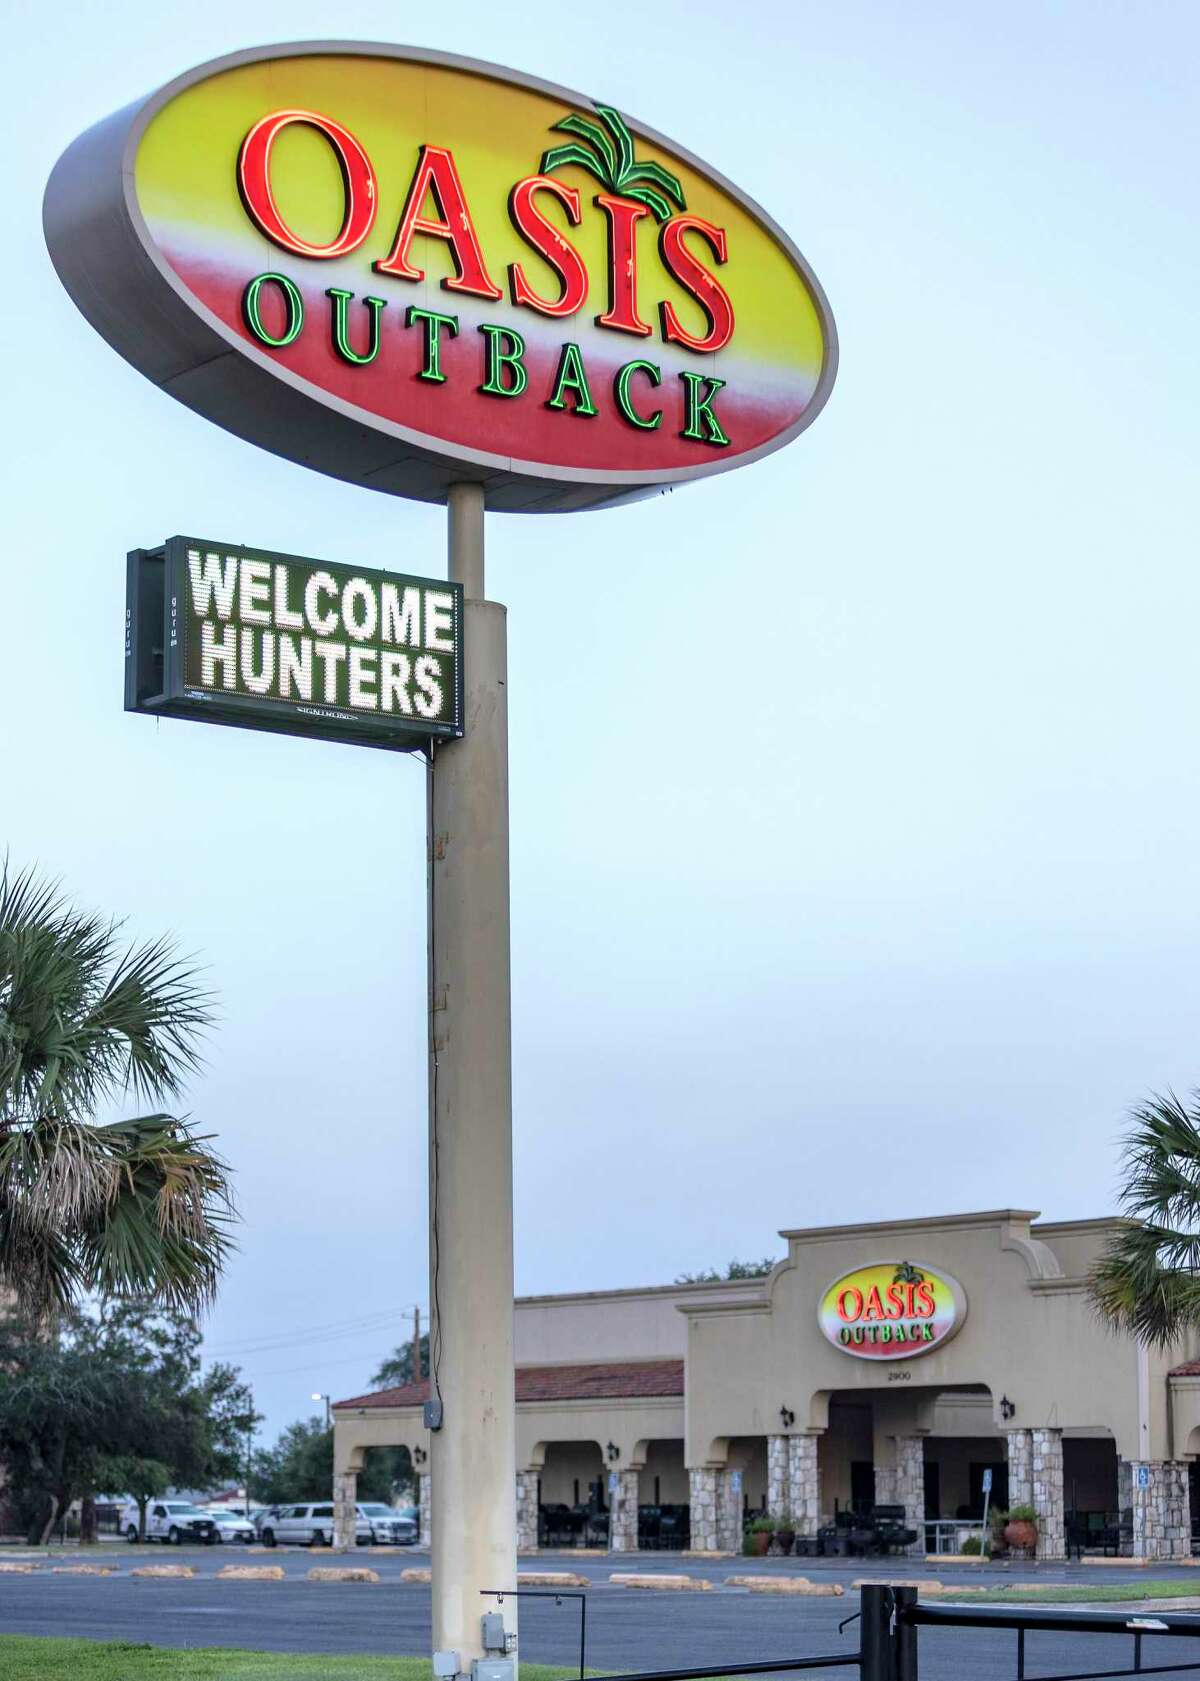 Oasis Outback, an outdoor supply store and gunship is seen Wednesday May 25, 2022 in Uvalde, Texas. Sources tell the San Antonio Express-News Salvador Rolando Ramos, 18, bought the guns he used in a shooting spree at Robb Elementary School to kill 19 children and two teachers at Oasis Outback shortly after his 18th birthday.